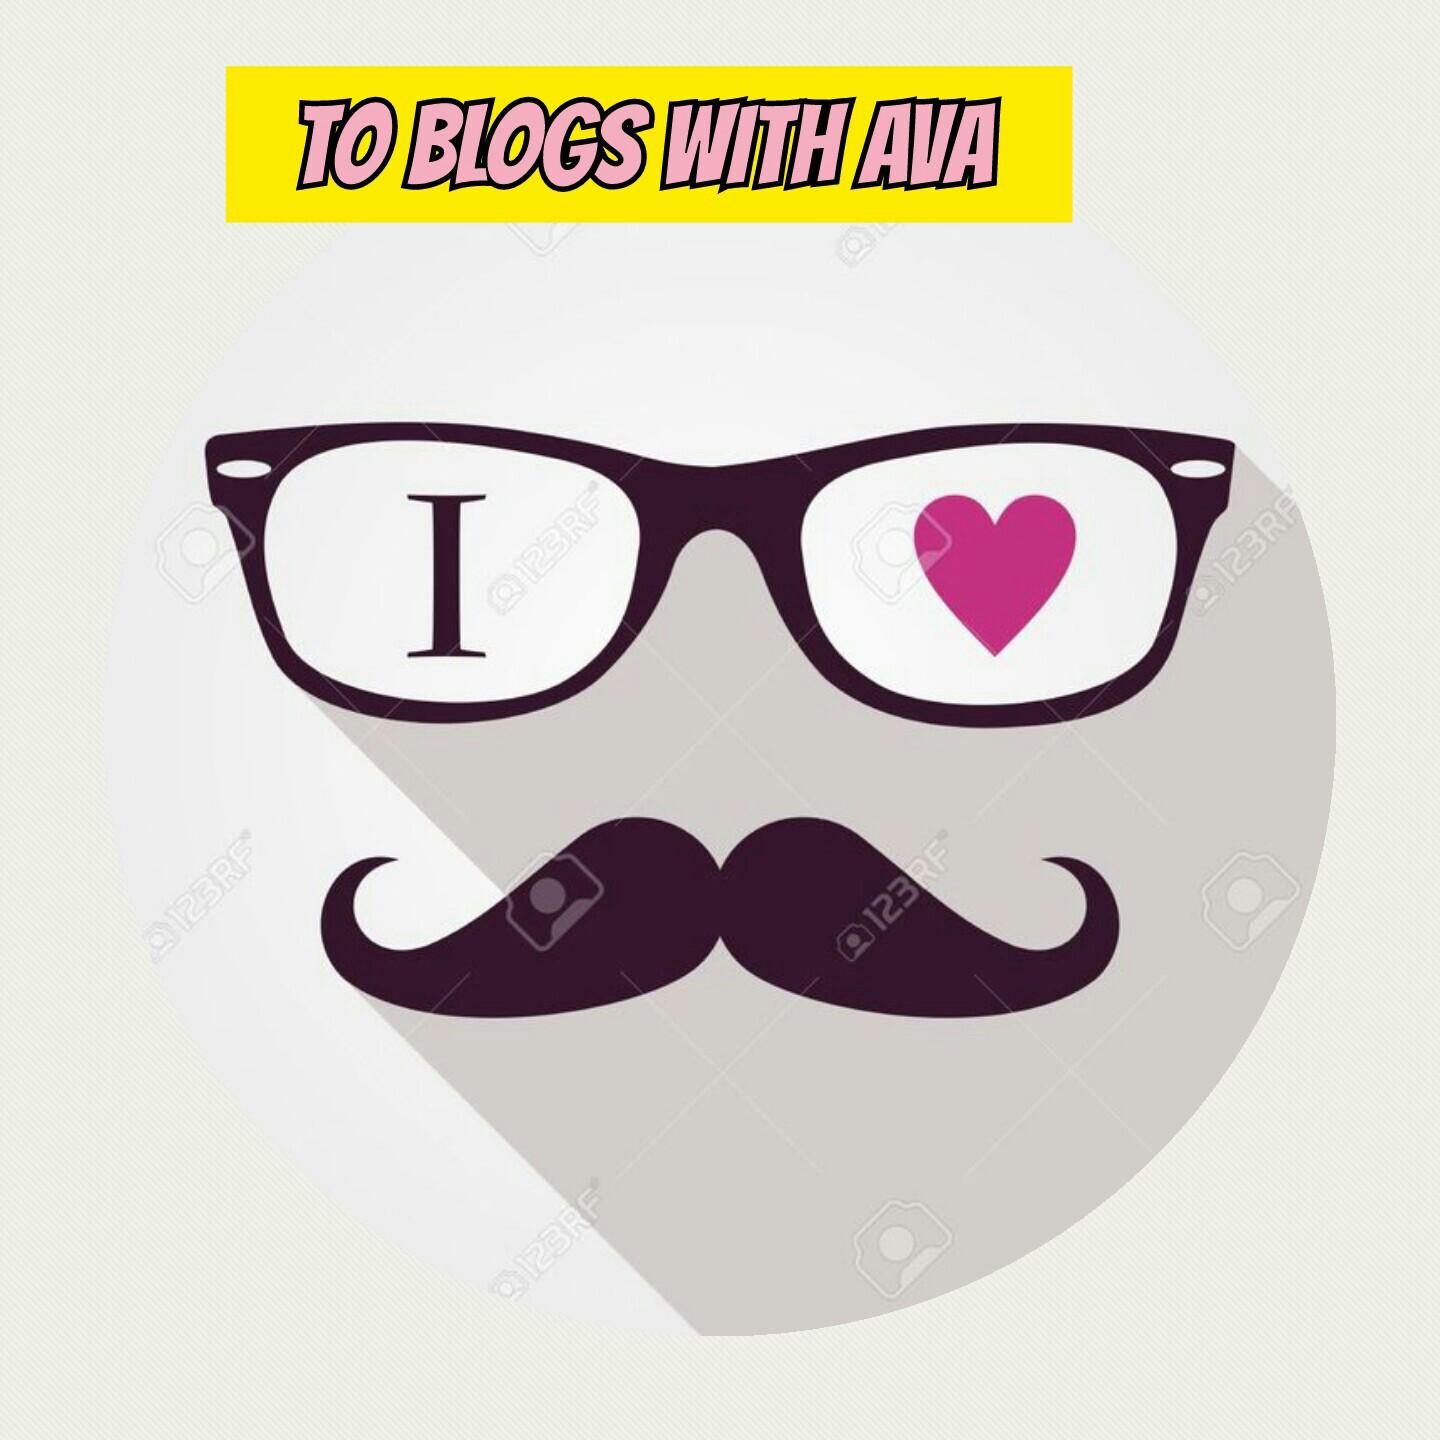 To blogs with ava 